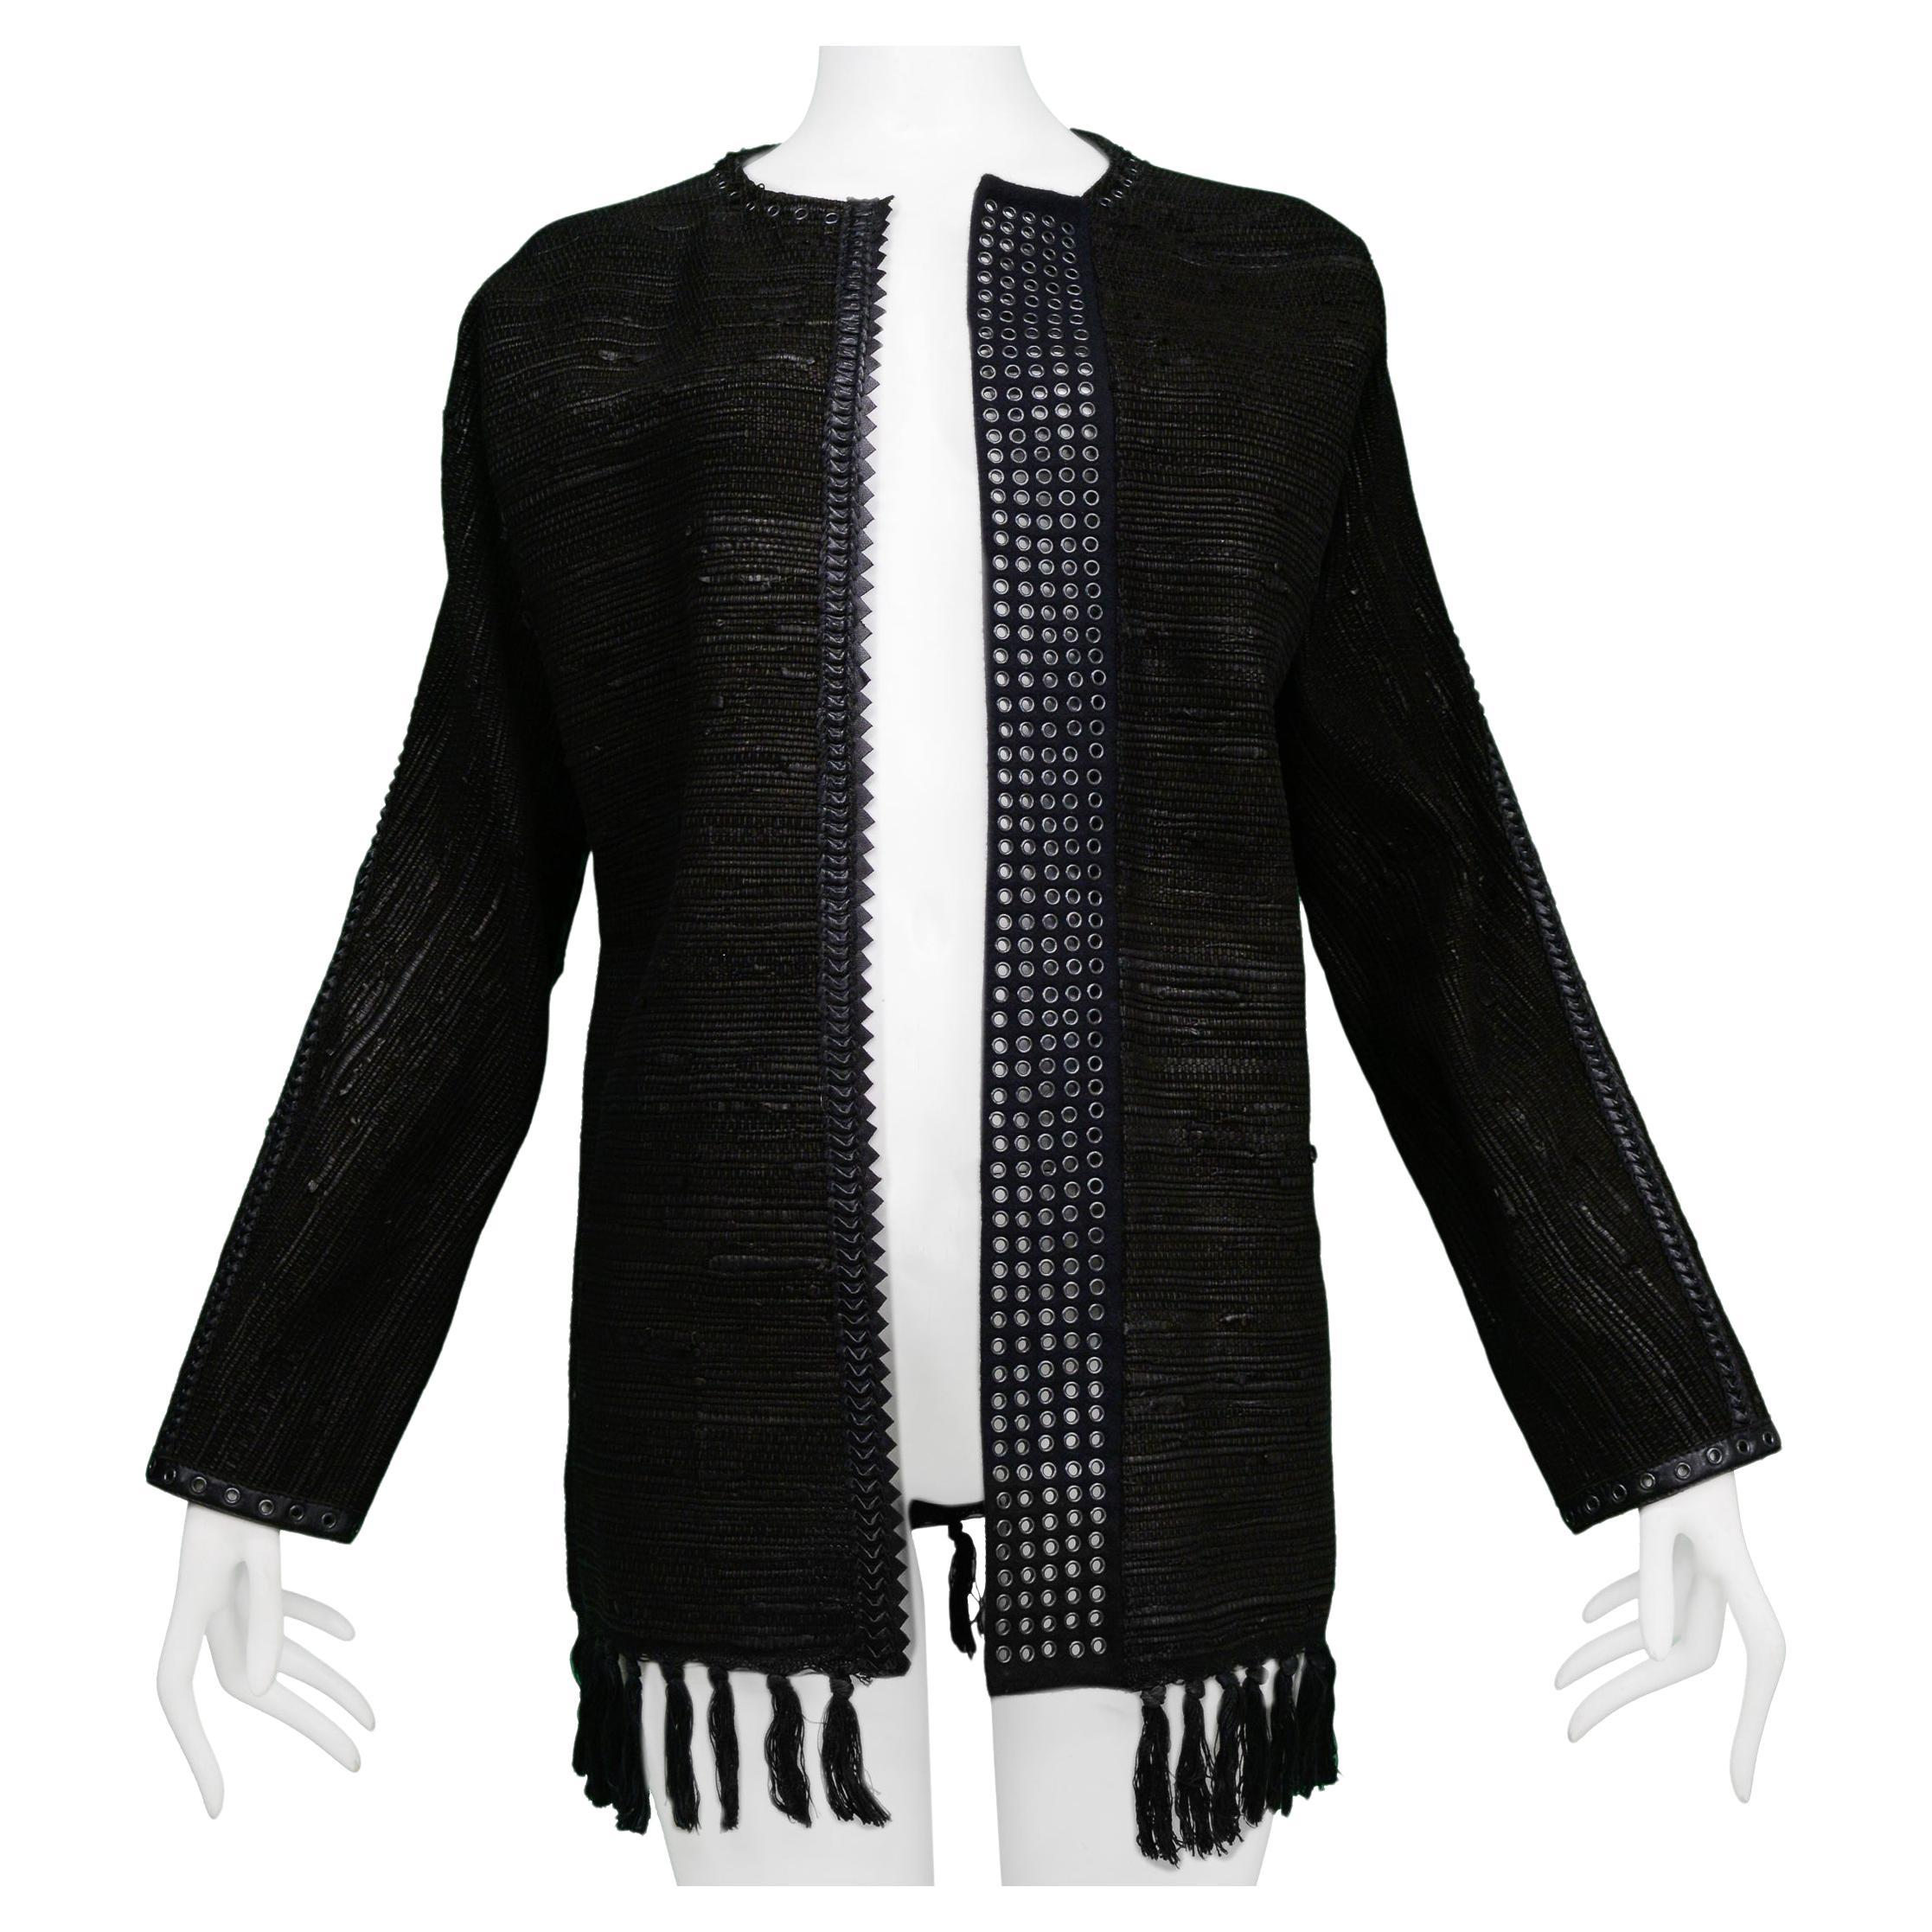 Stunning Gianfranco Ferre Leather & Wool Jacket With Tassels and Grommets  For Sale